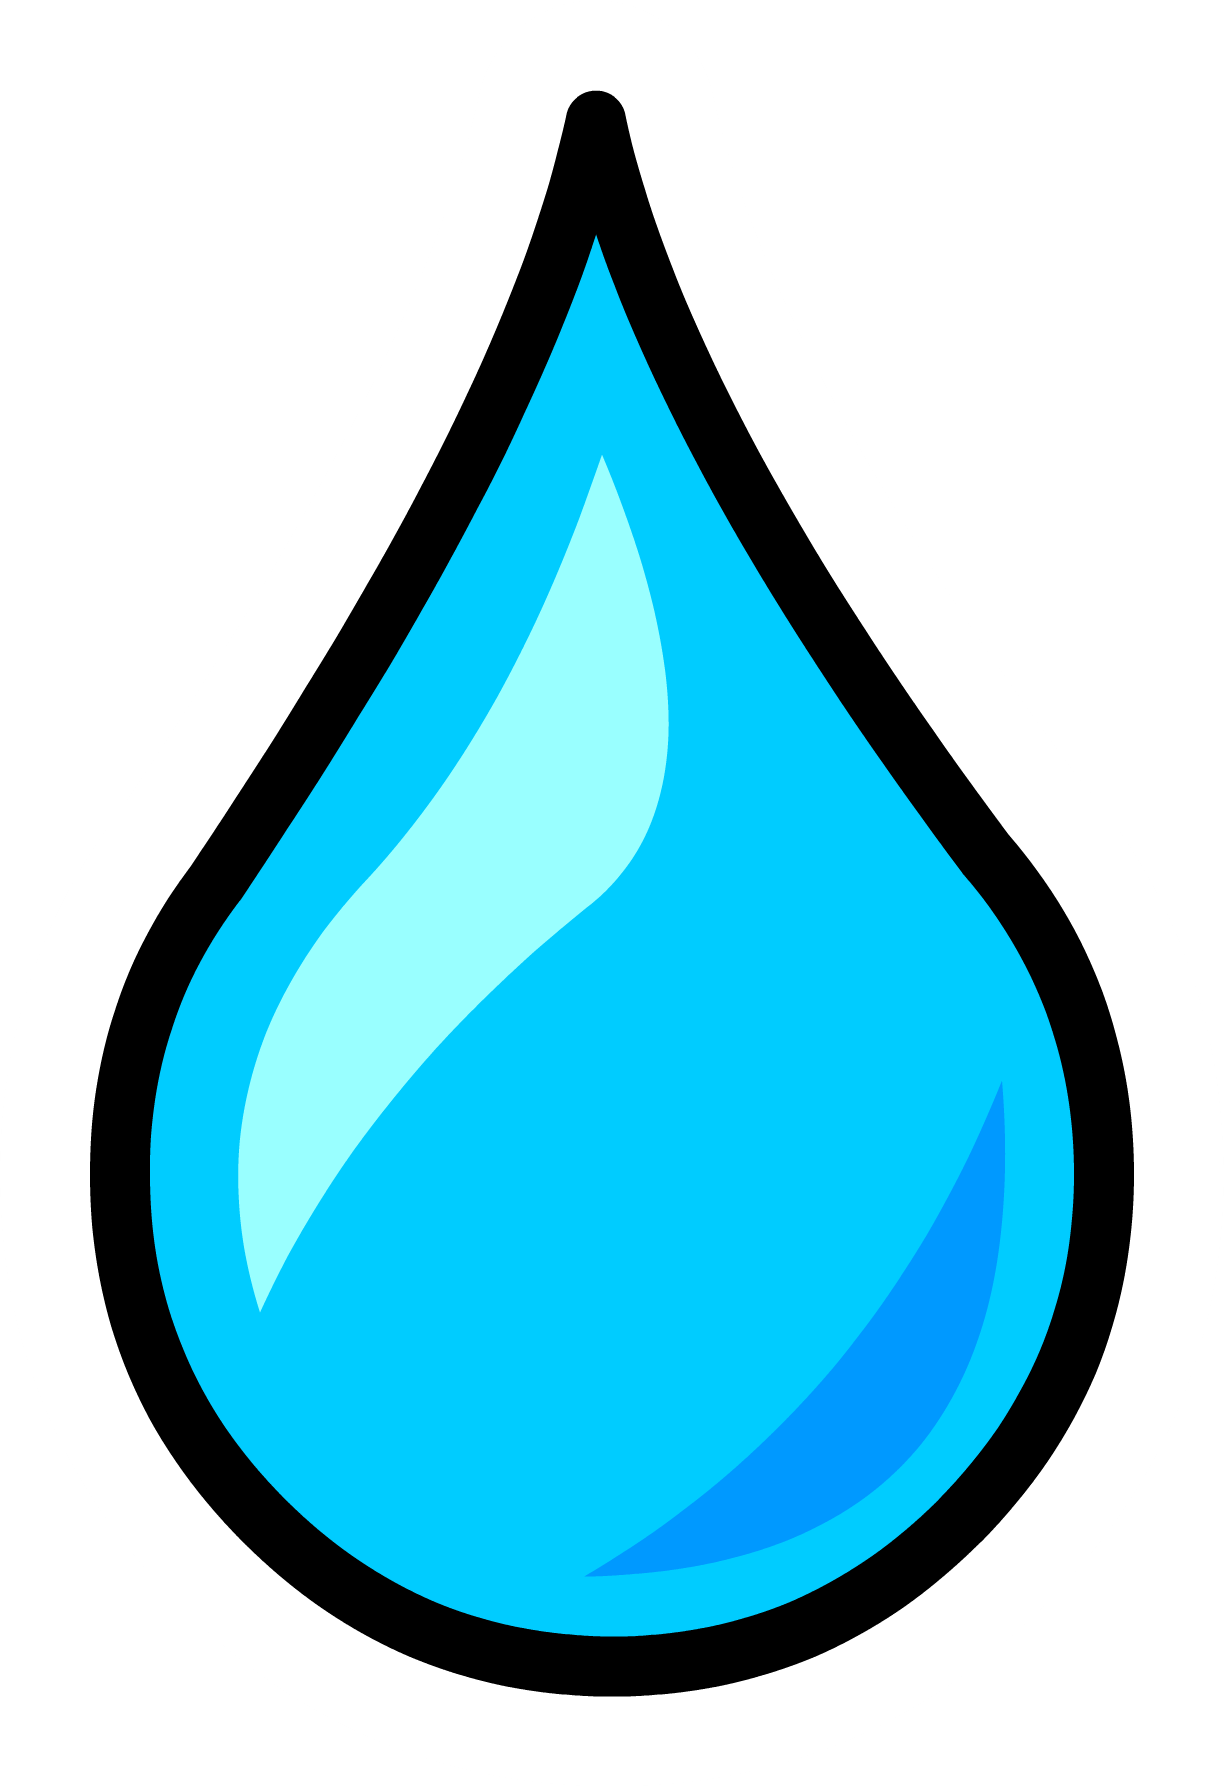 Pin club penguin rewritten. Fountain clipart free water droplet